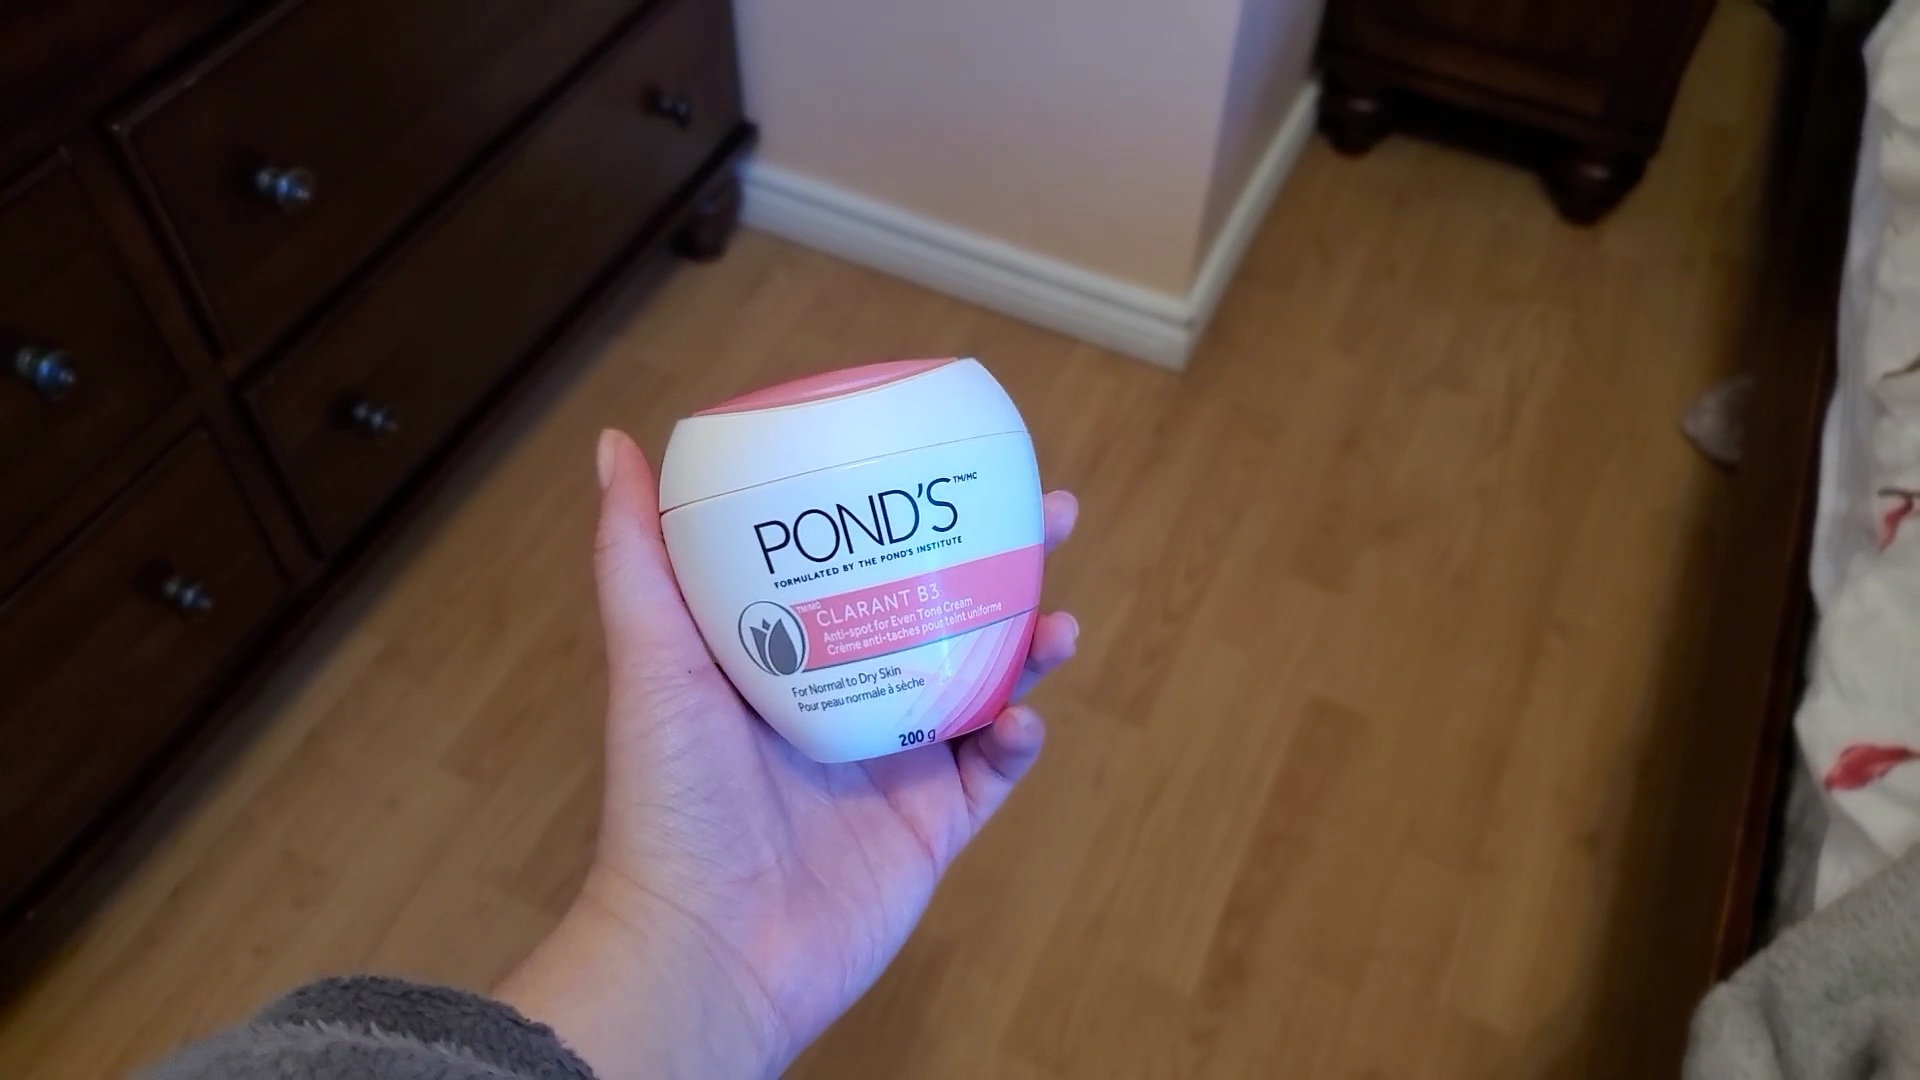 Pond's Clarant B3 Cream - How to Look Put-Together - Beauty and Grooming Routine